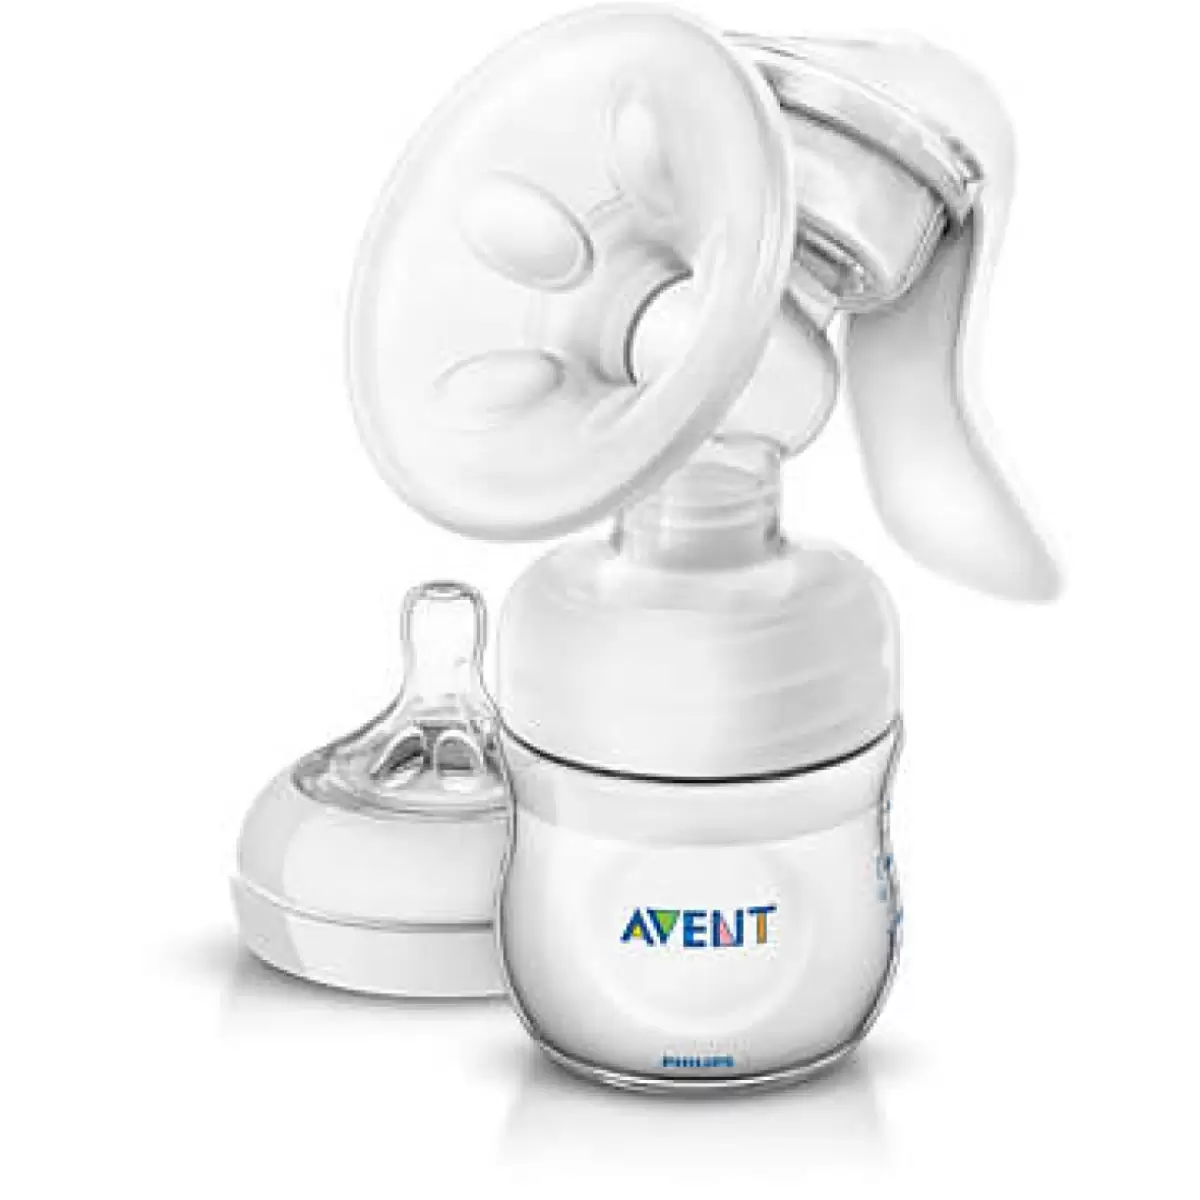 Philips Avent Manual Breast Pump With Bottle